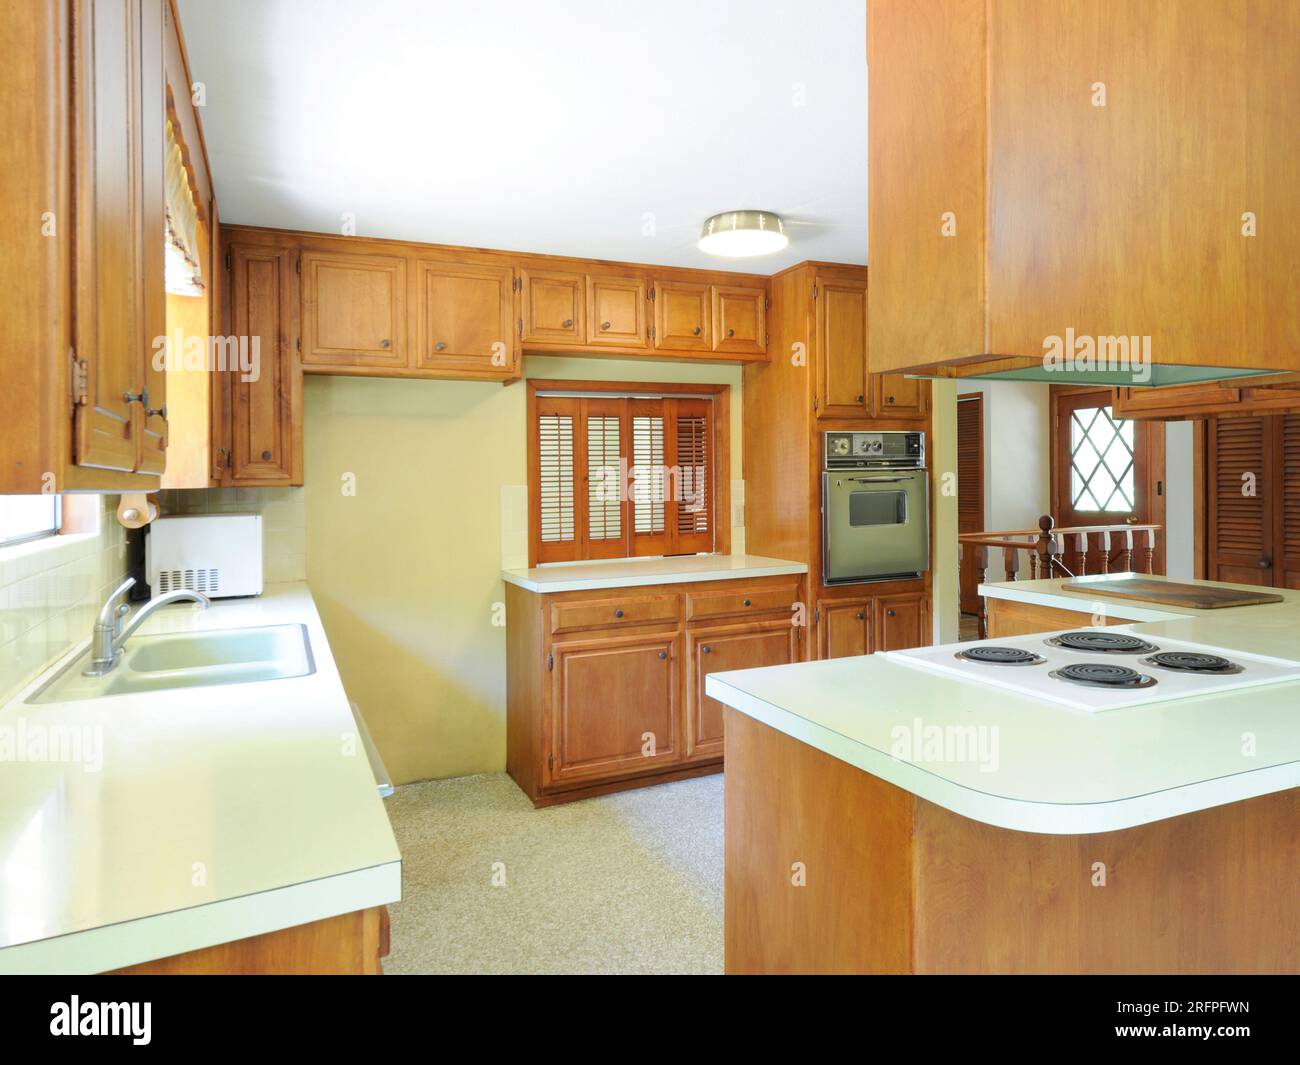 Out dated kitchen interior Stock Photo